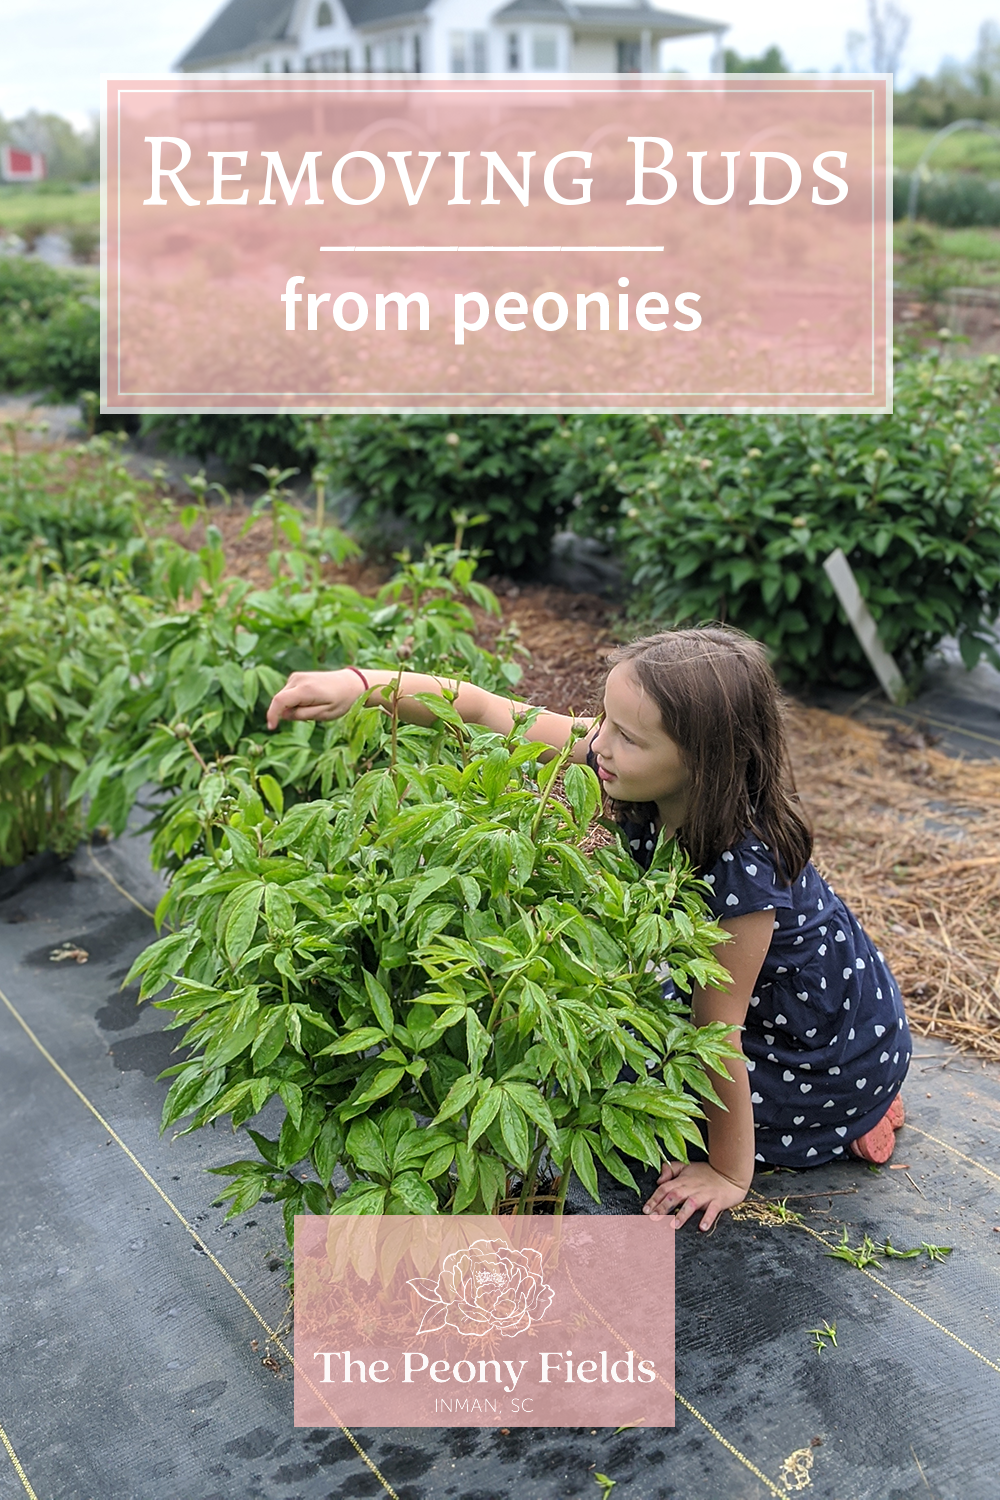 Removing buds from peonies. A girl removes buds from a peony plant.